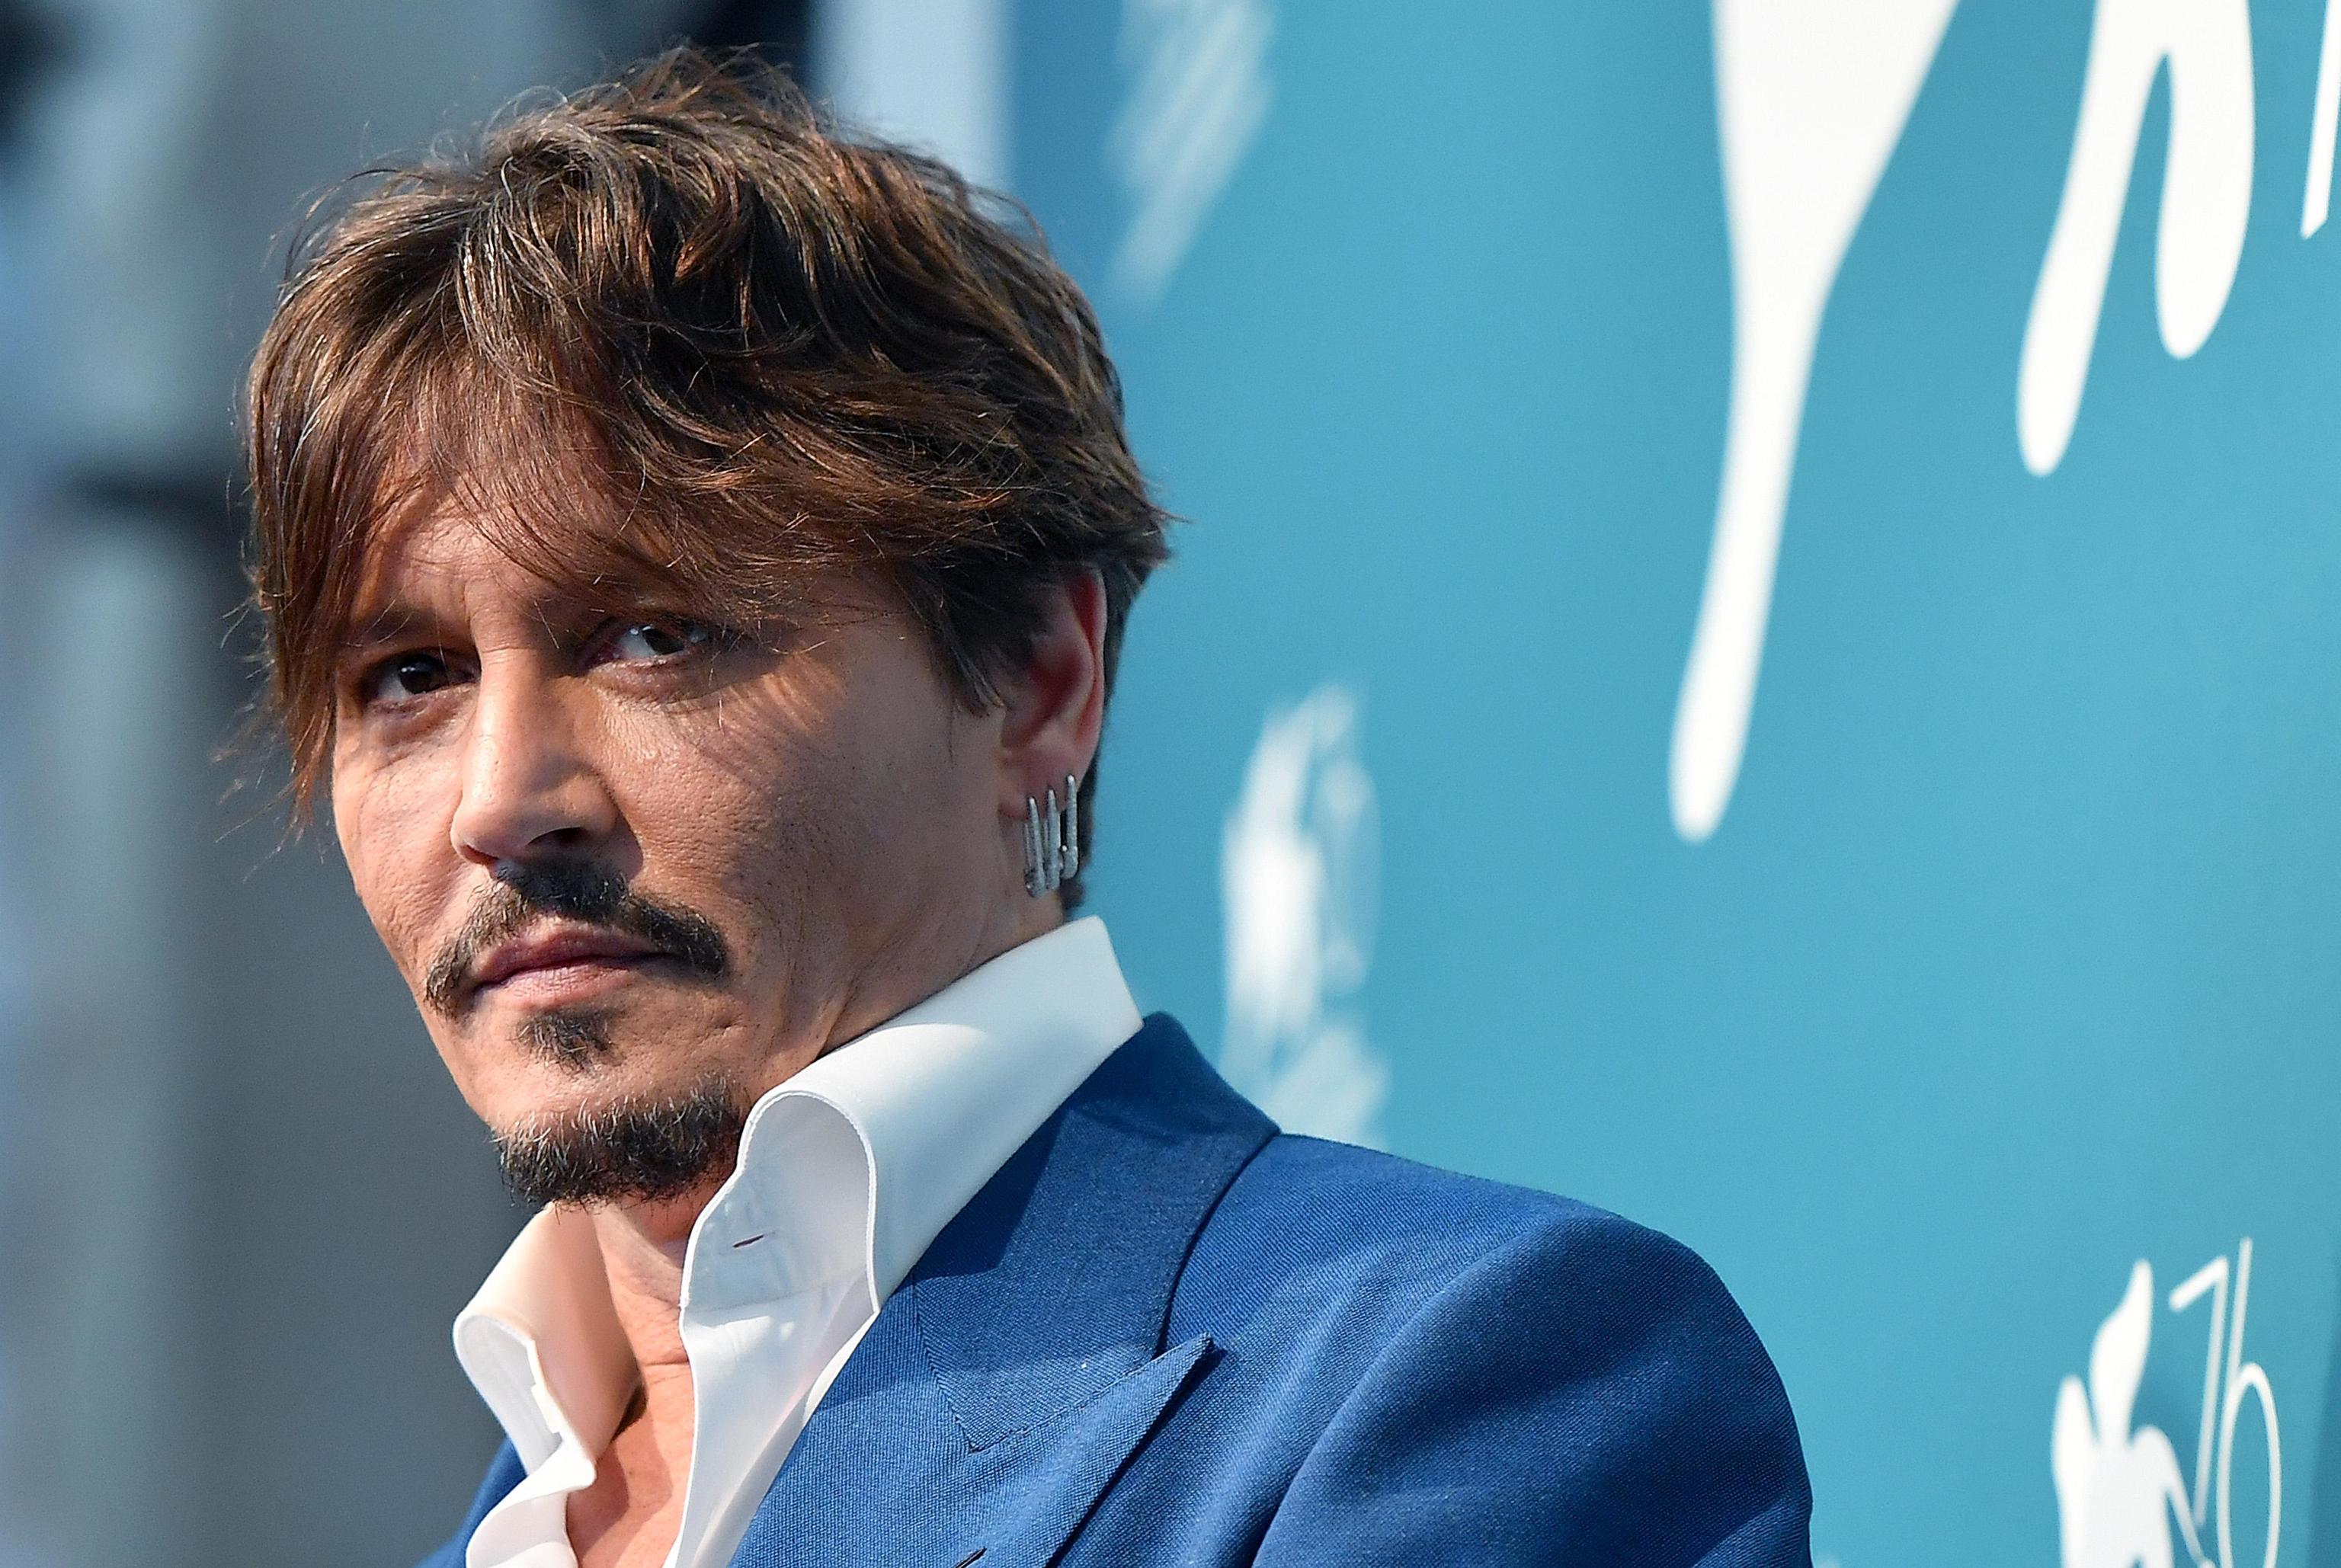 Johnny Depp on Waiting for the Barbarians: “I love being the bad guy”